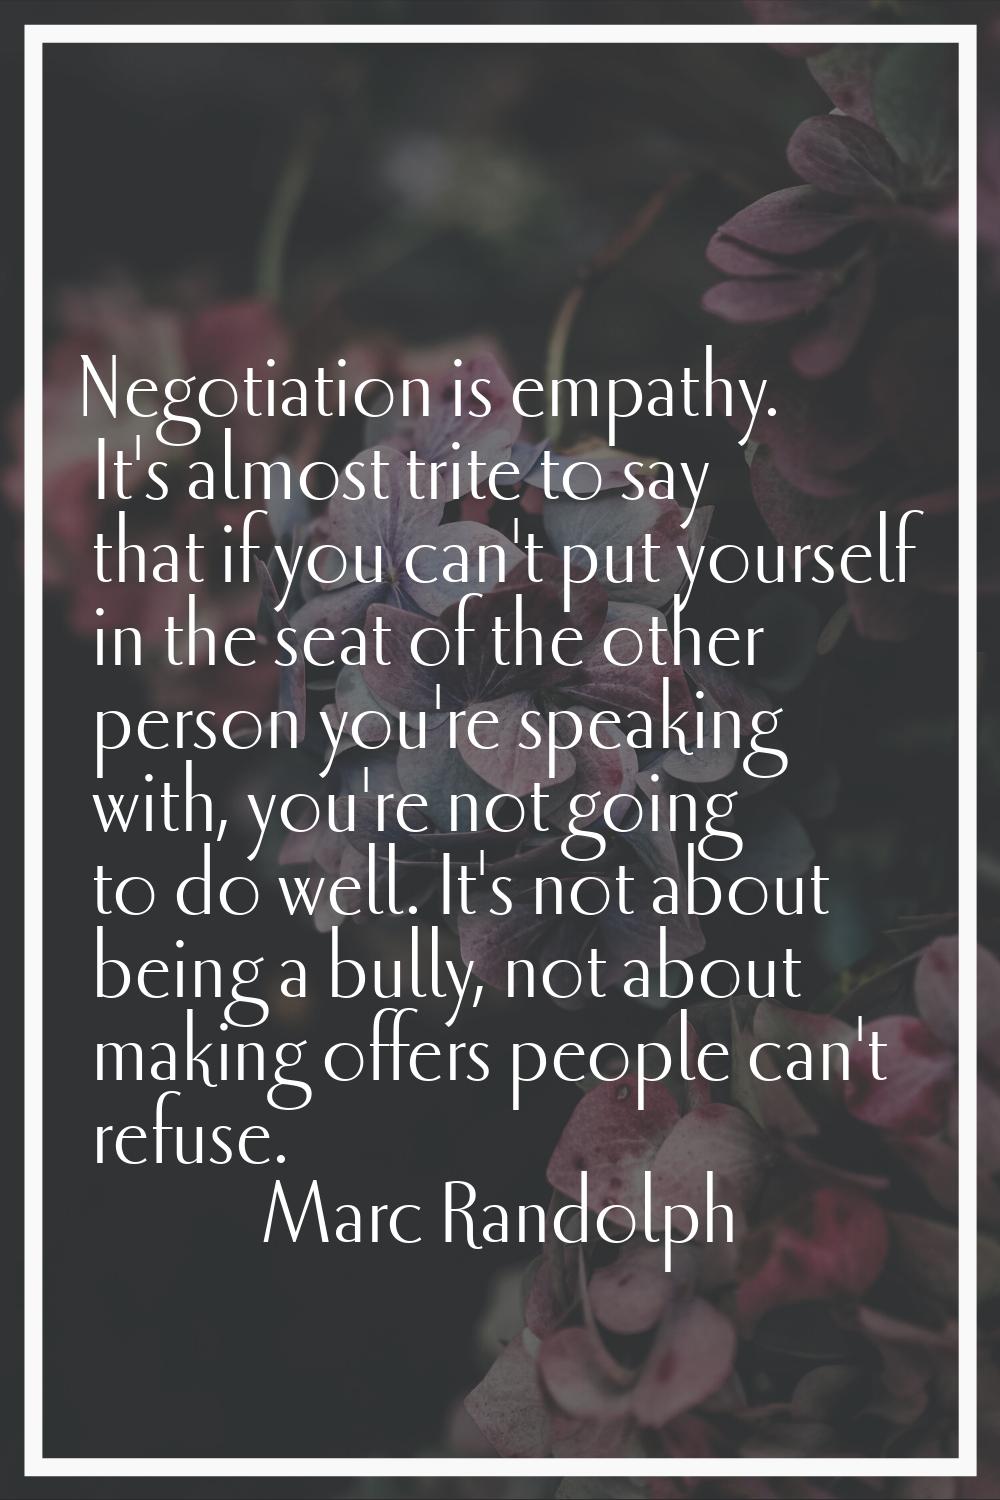 Negotiation is empathy. It's almost trite to say that if you can't put yourself in the seat of the 